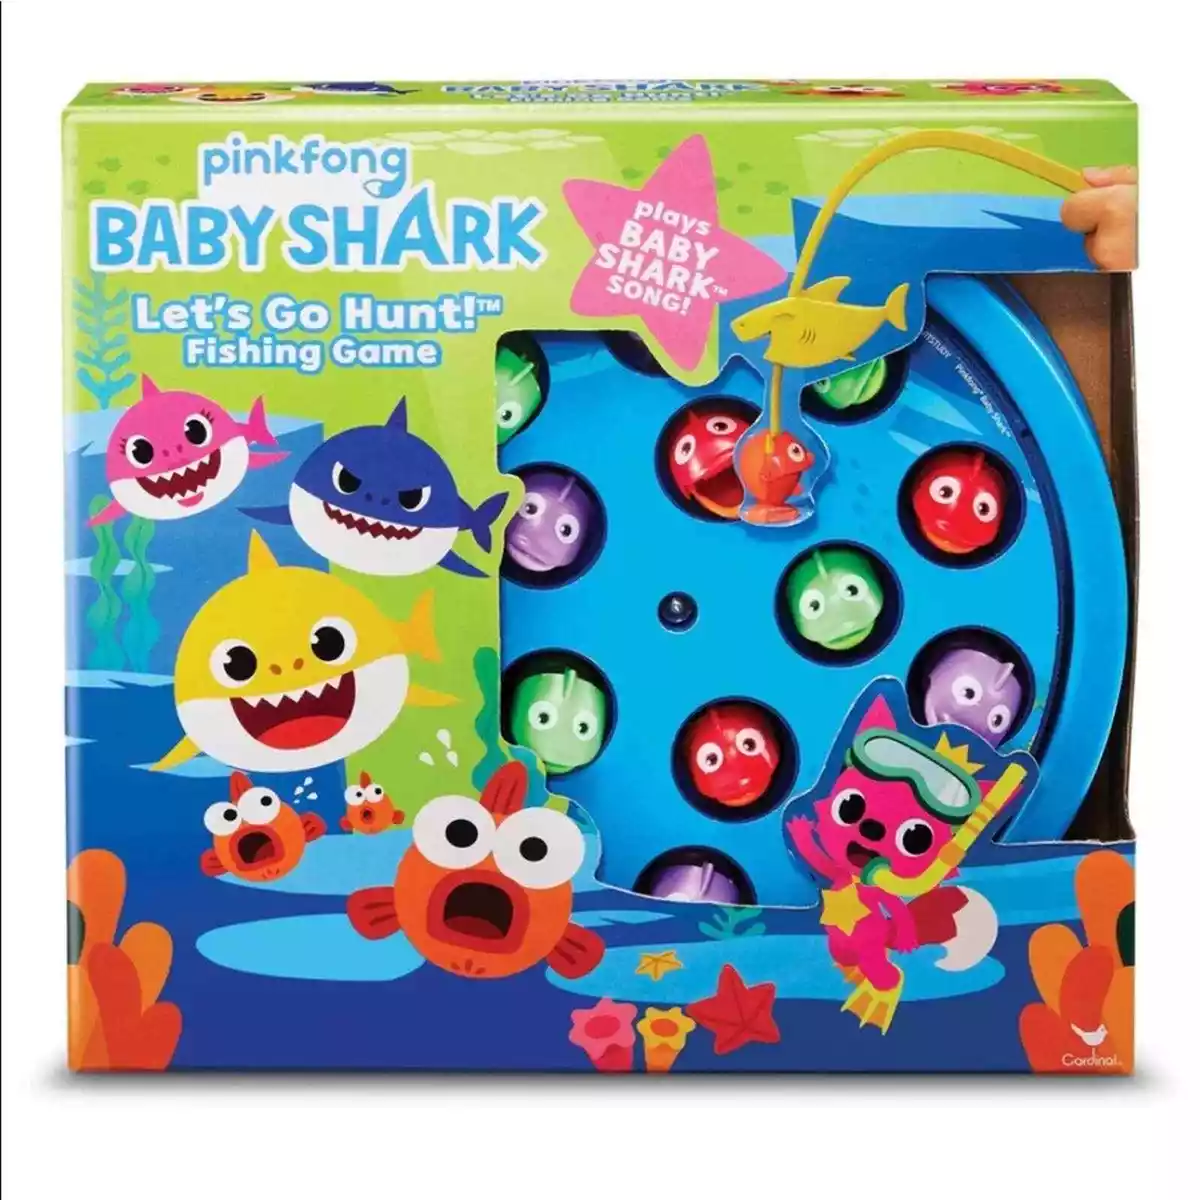 Pinkfong Baby Shark Let's Go Hunt Musical Fishing Game for Families & Kids  NEW